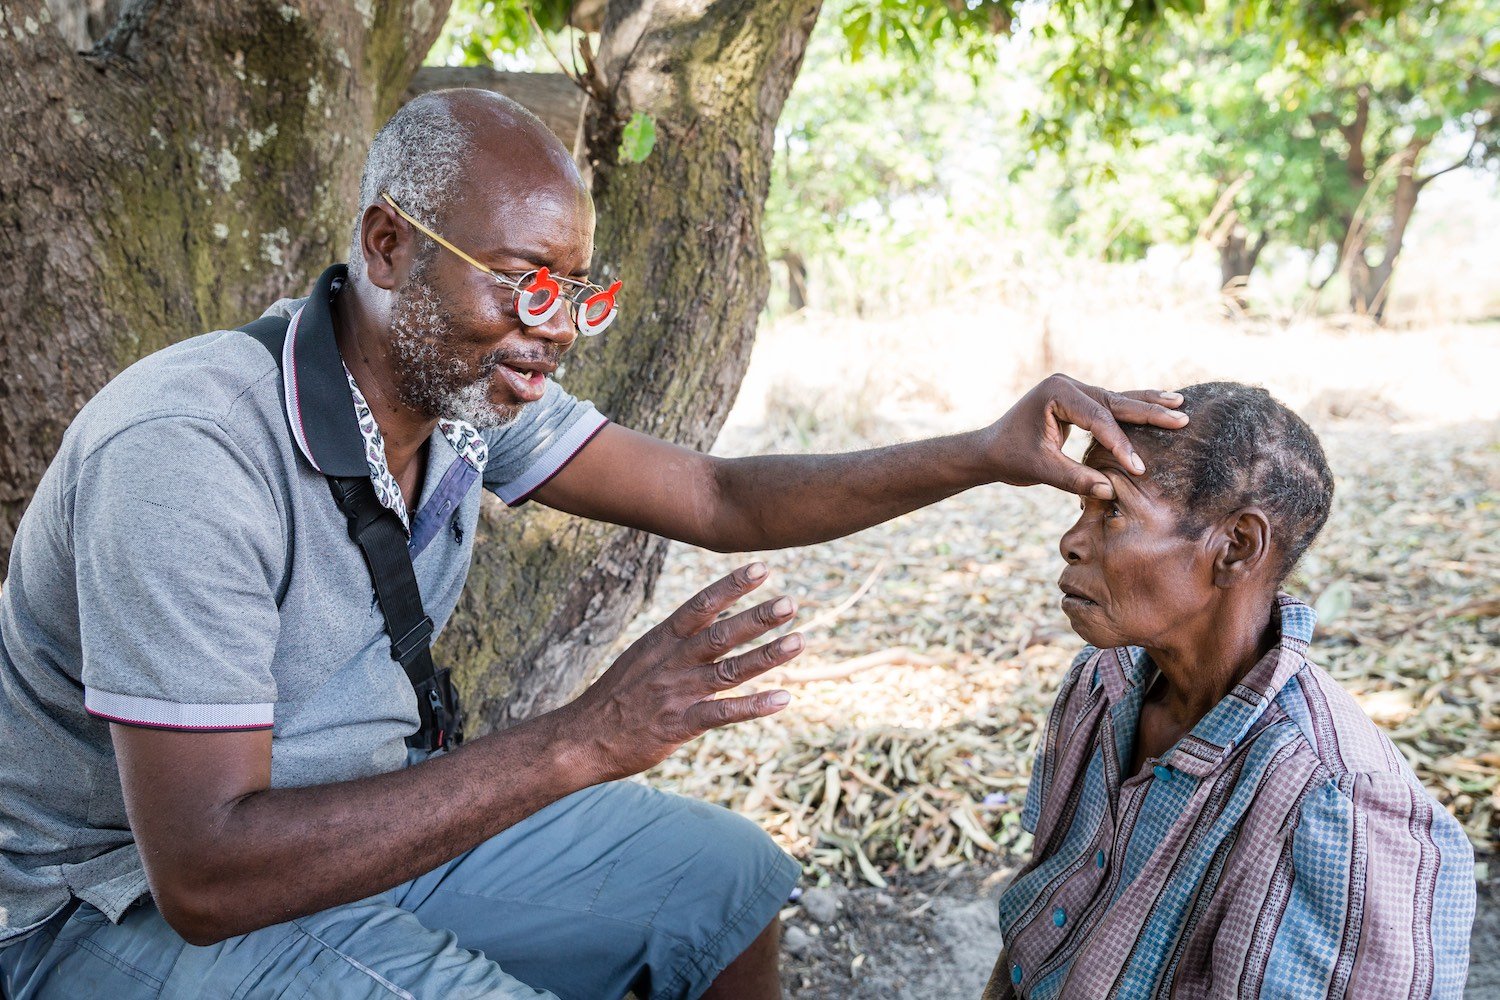 Eye surgeon Bruno Kandei explains the procedure for halting blinding trachoma to Sibeso Simate, 72, a patient in western Zambia.  Photo: Marcus Perkins / Uniting to Combat Neglected Tropical Diseases